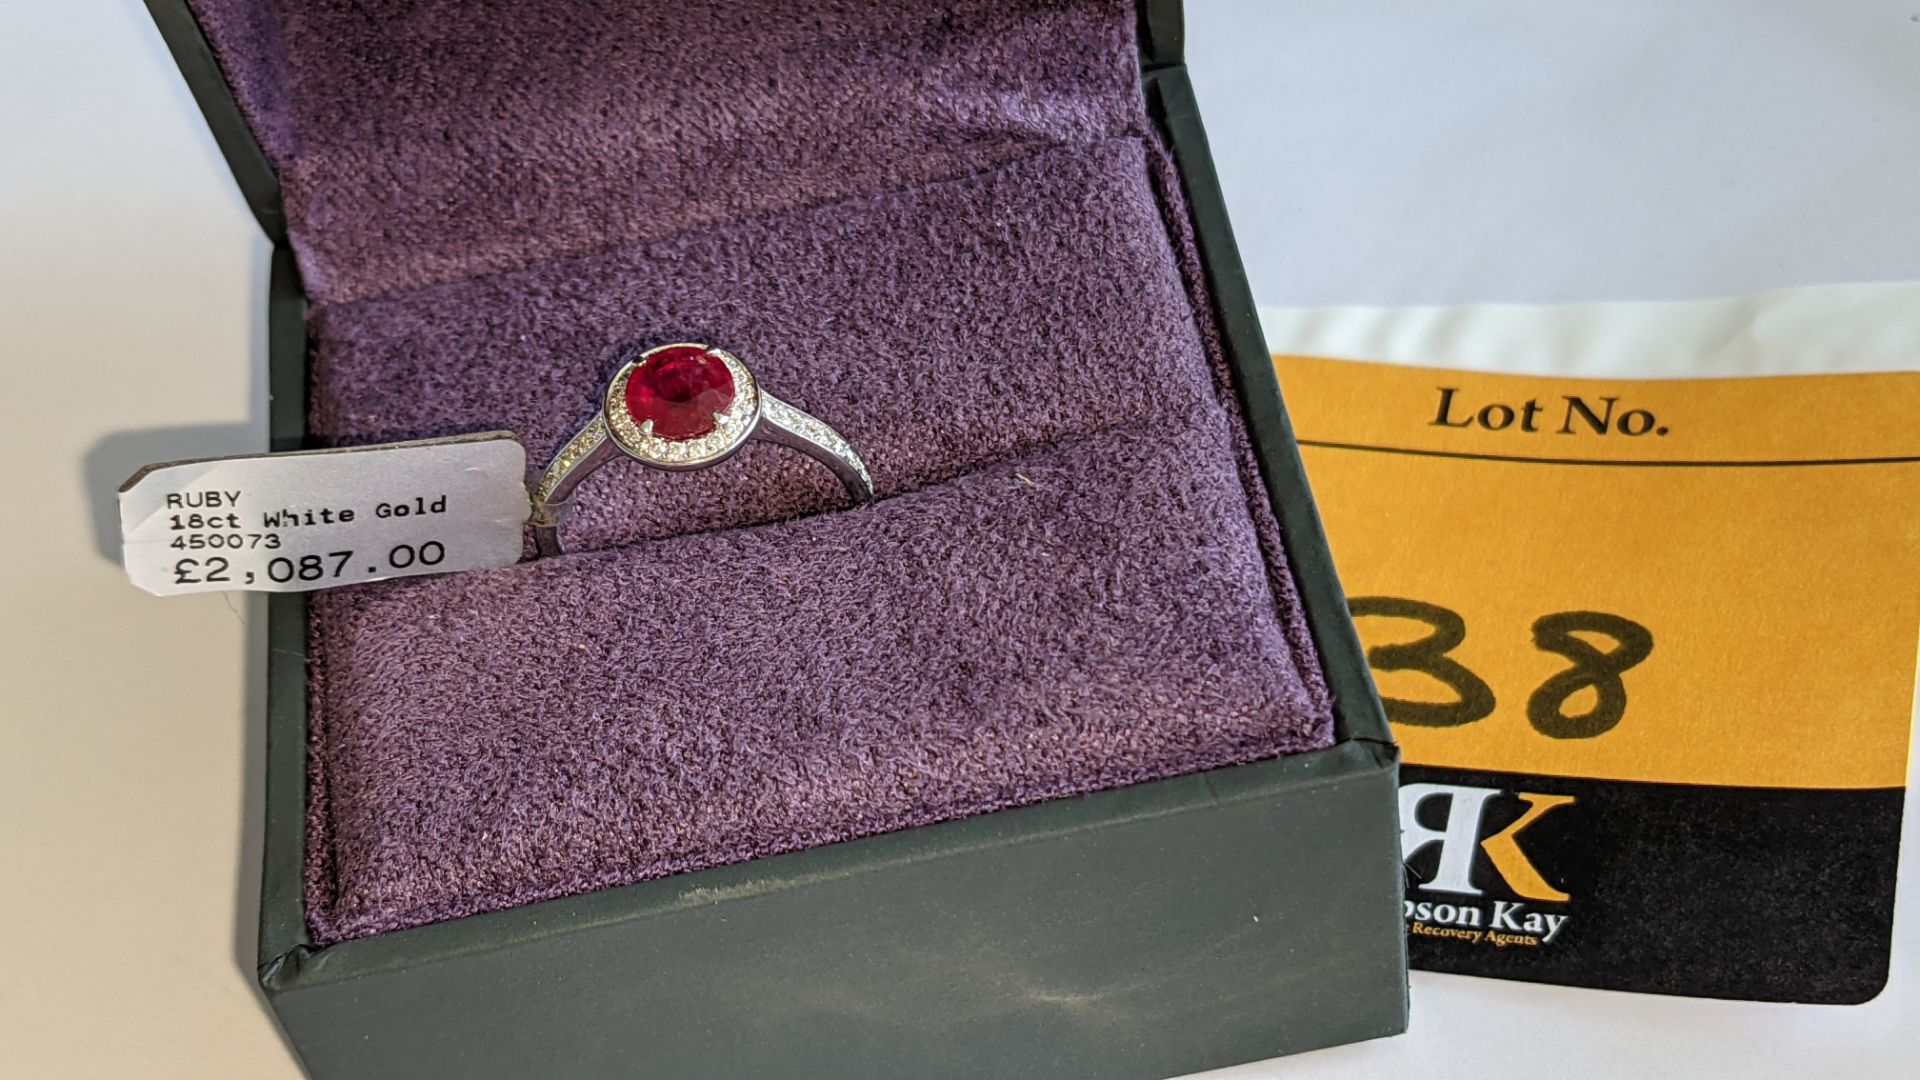 18ct white gold ring with central ruby & 0.27ct diamonds around the ruby & on each shoulder. RRP £2